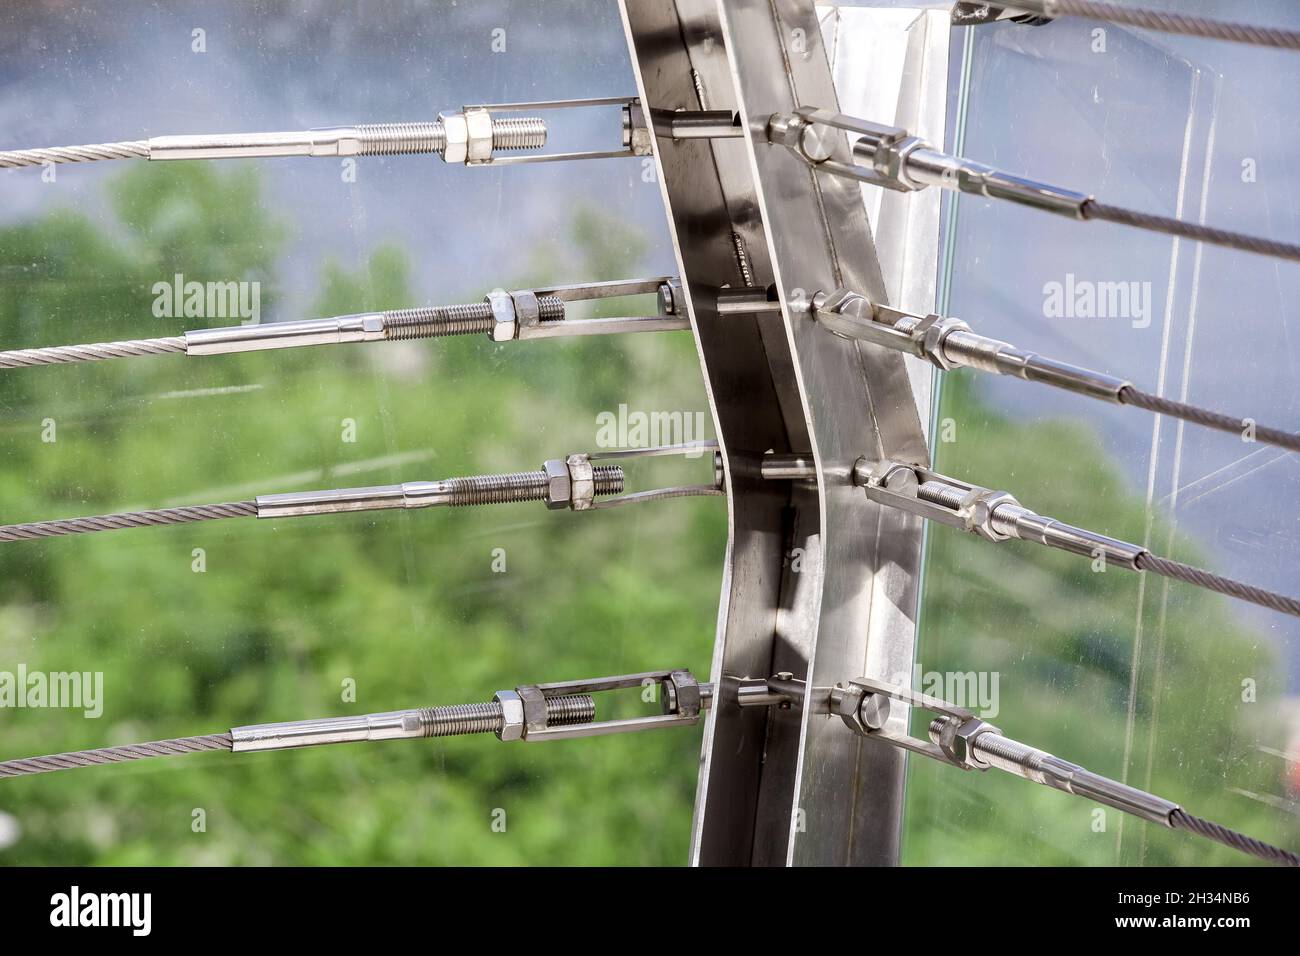 A close up view of lock sling steel and screw, a detail of frame on glass bridge with fastening engineering construction stainless steel turnbuckle. Stock Photo